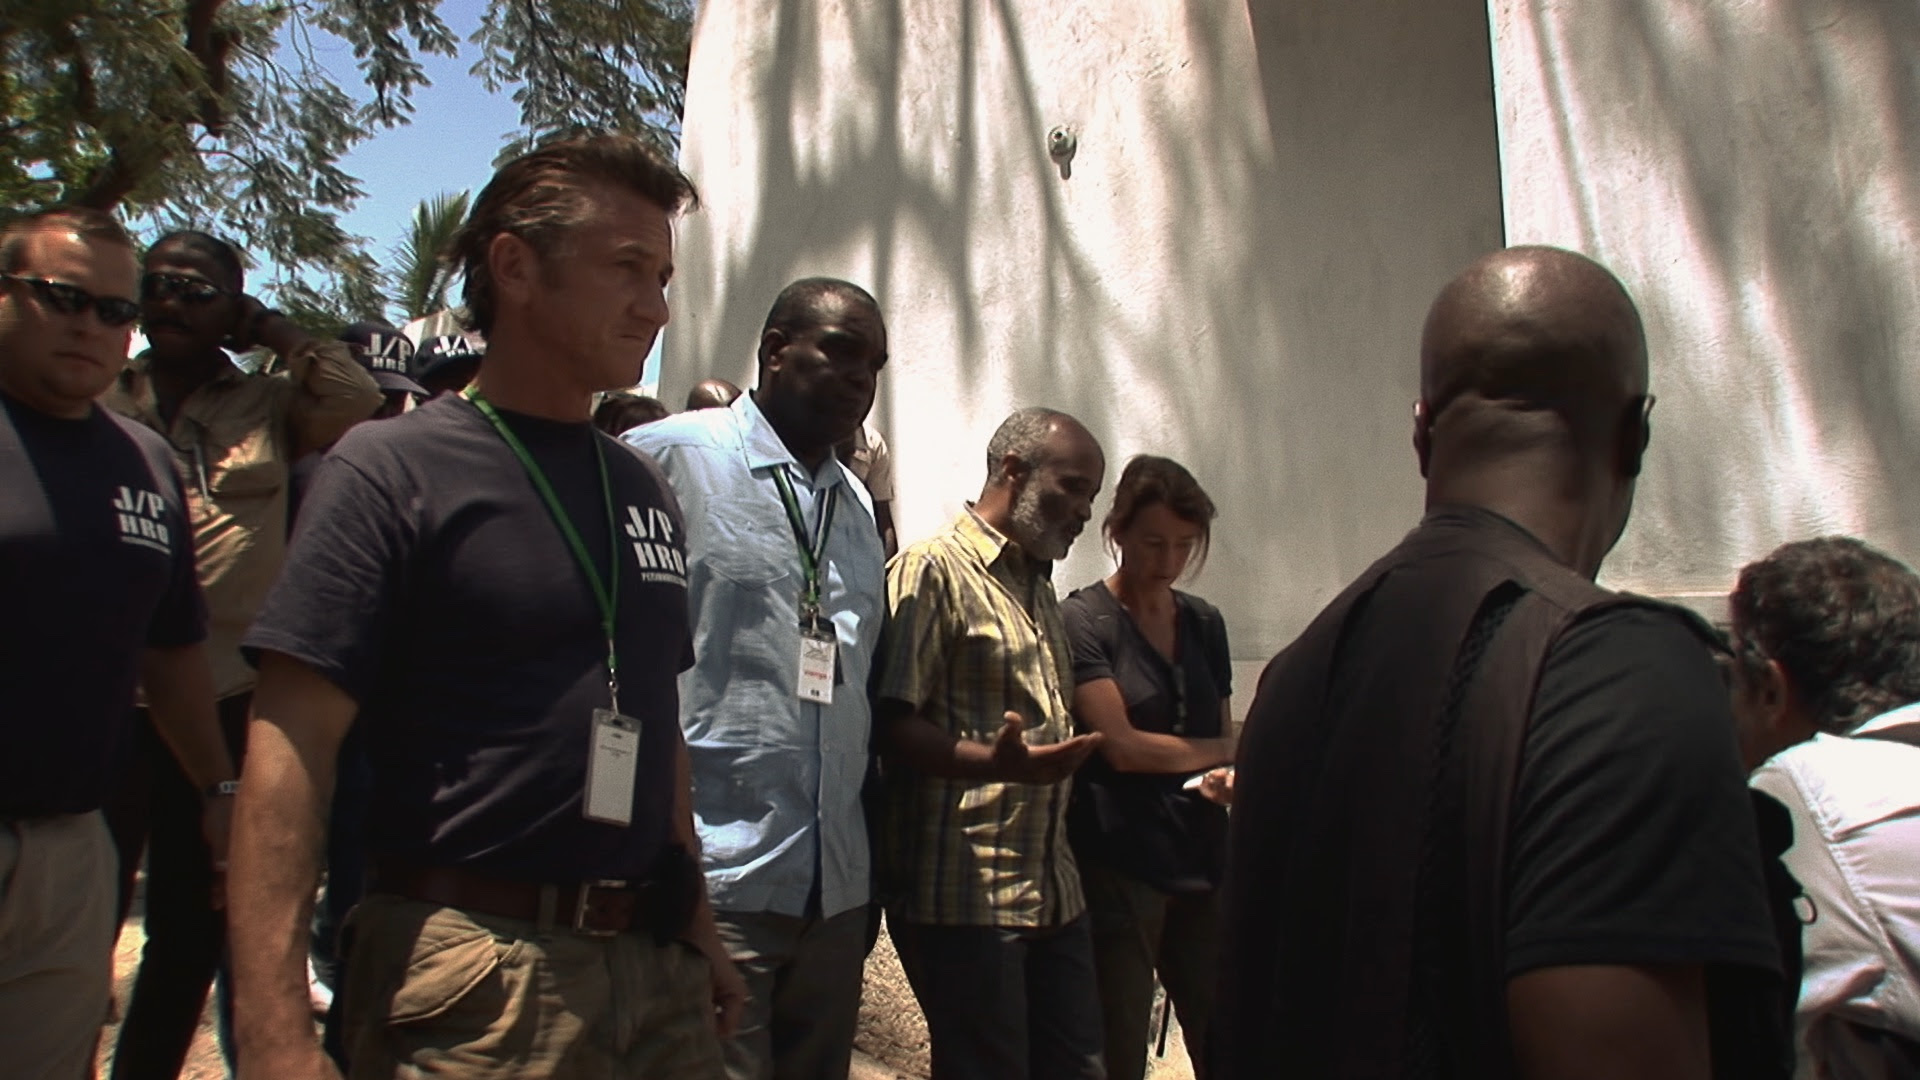 Don Hardy on Sean Penn’s Charitable Efforts in Haiti in Citizen Penn Doc [Exclusive Interview]